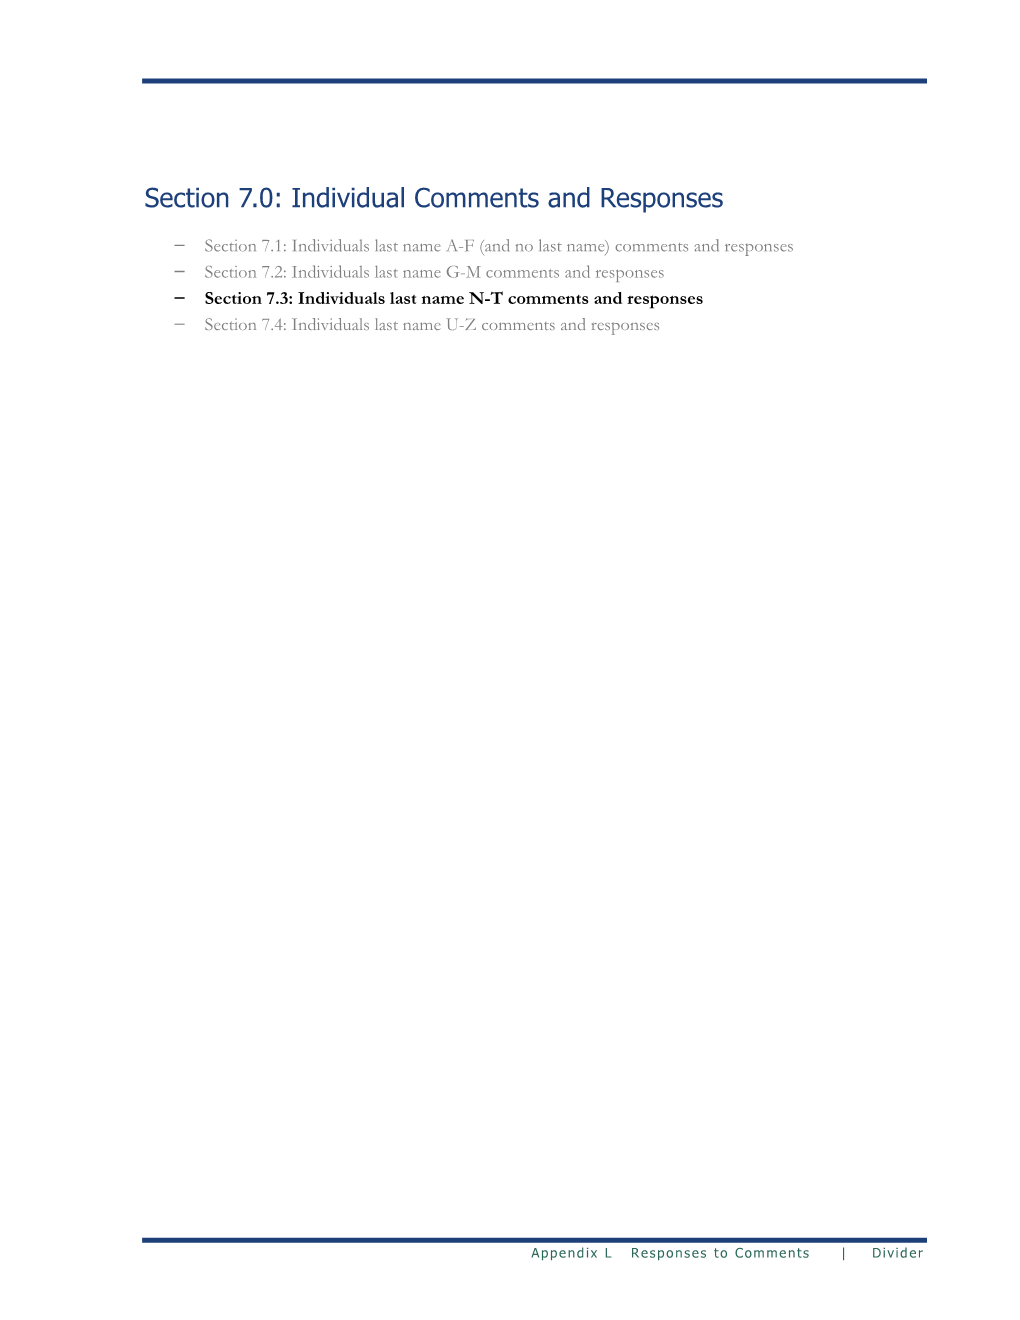 Section 7.0: Individual Comments and Responses